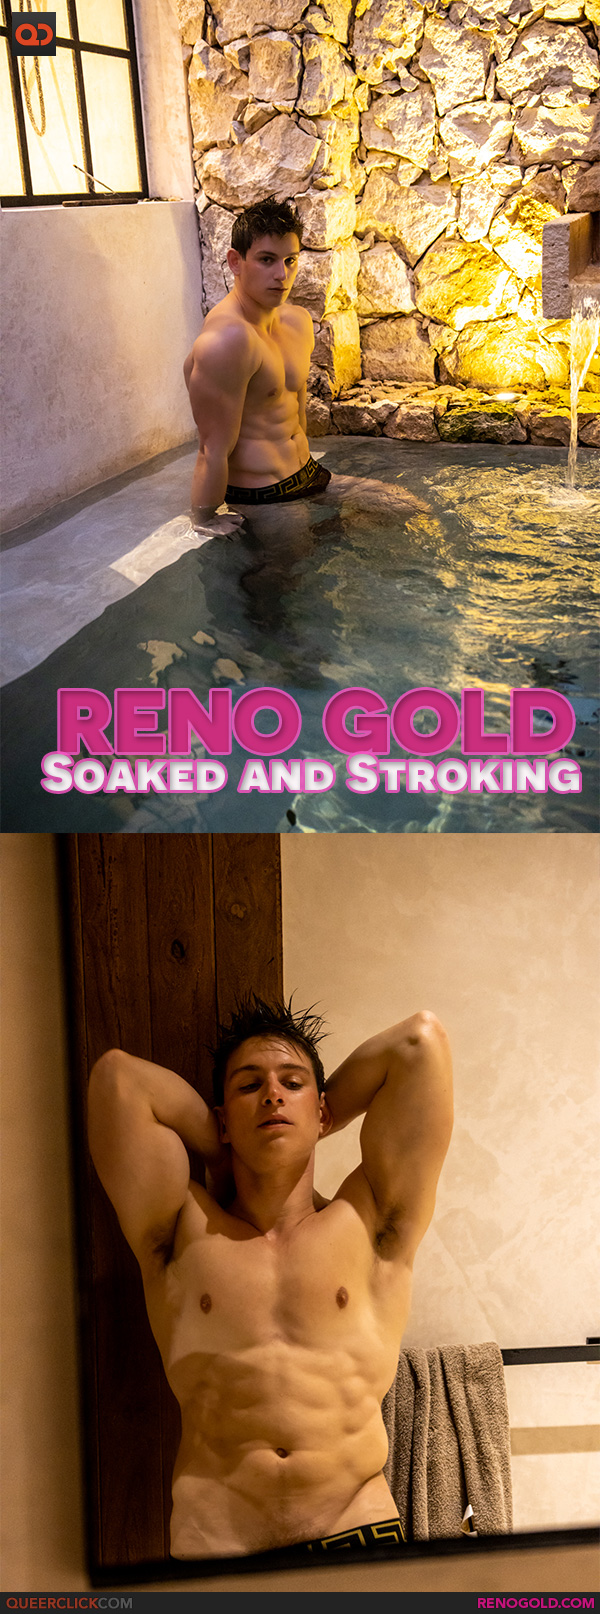 Reno Gold: Soaked and Stroking